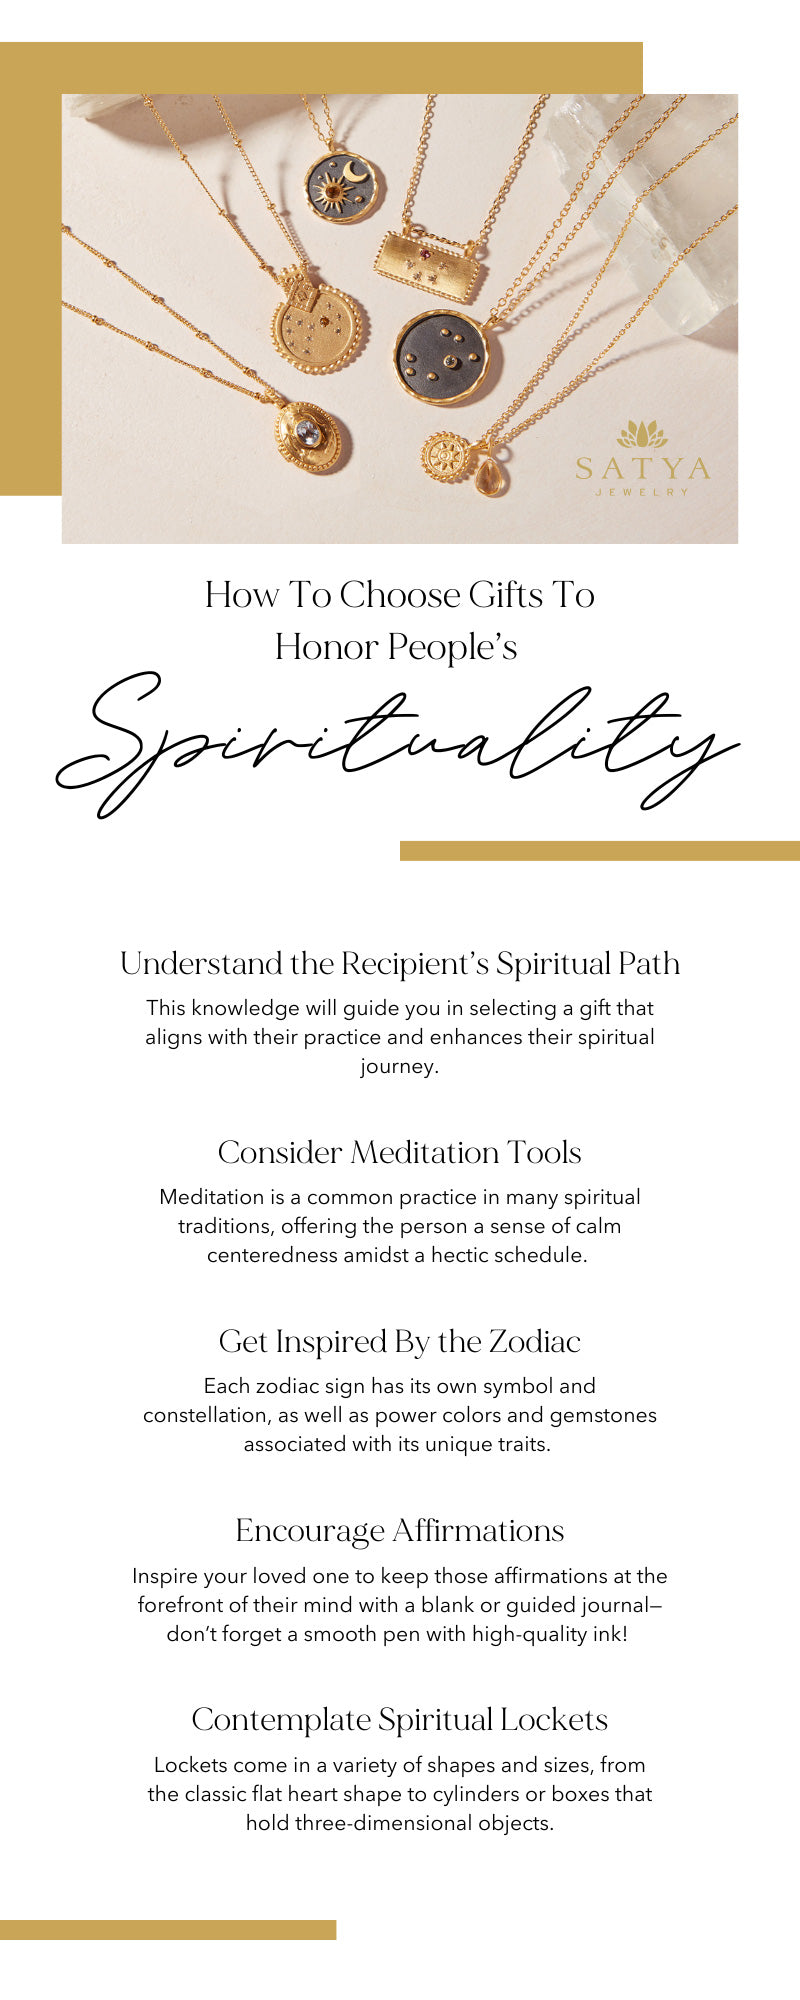 How To Choose Gifts To Honor People’s Spirituality